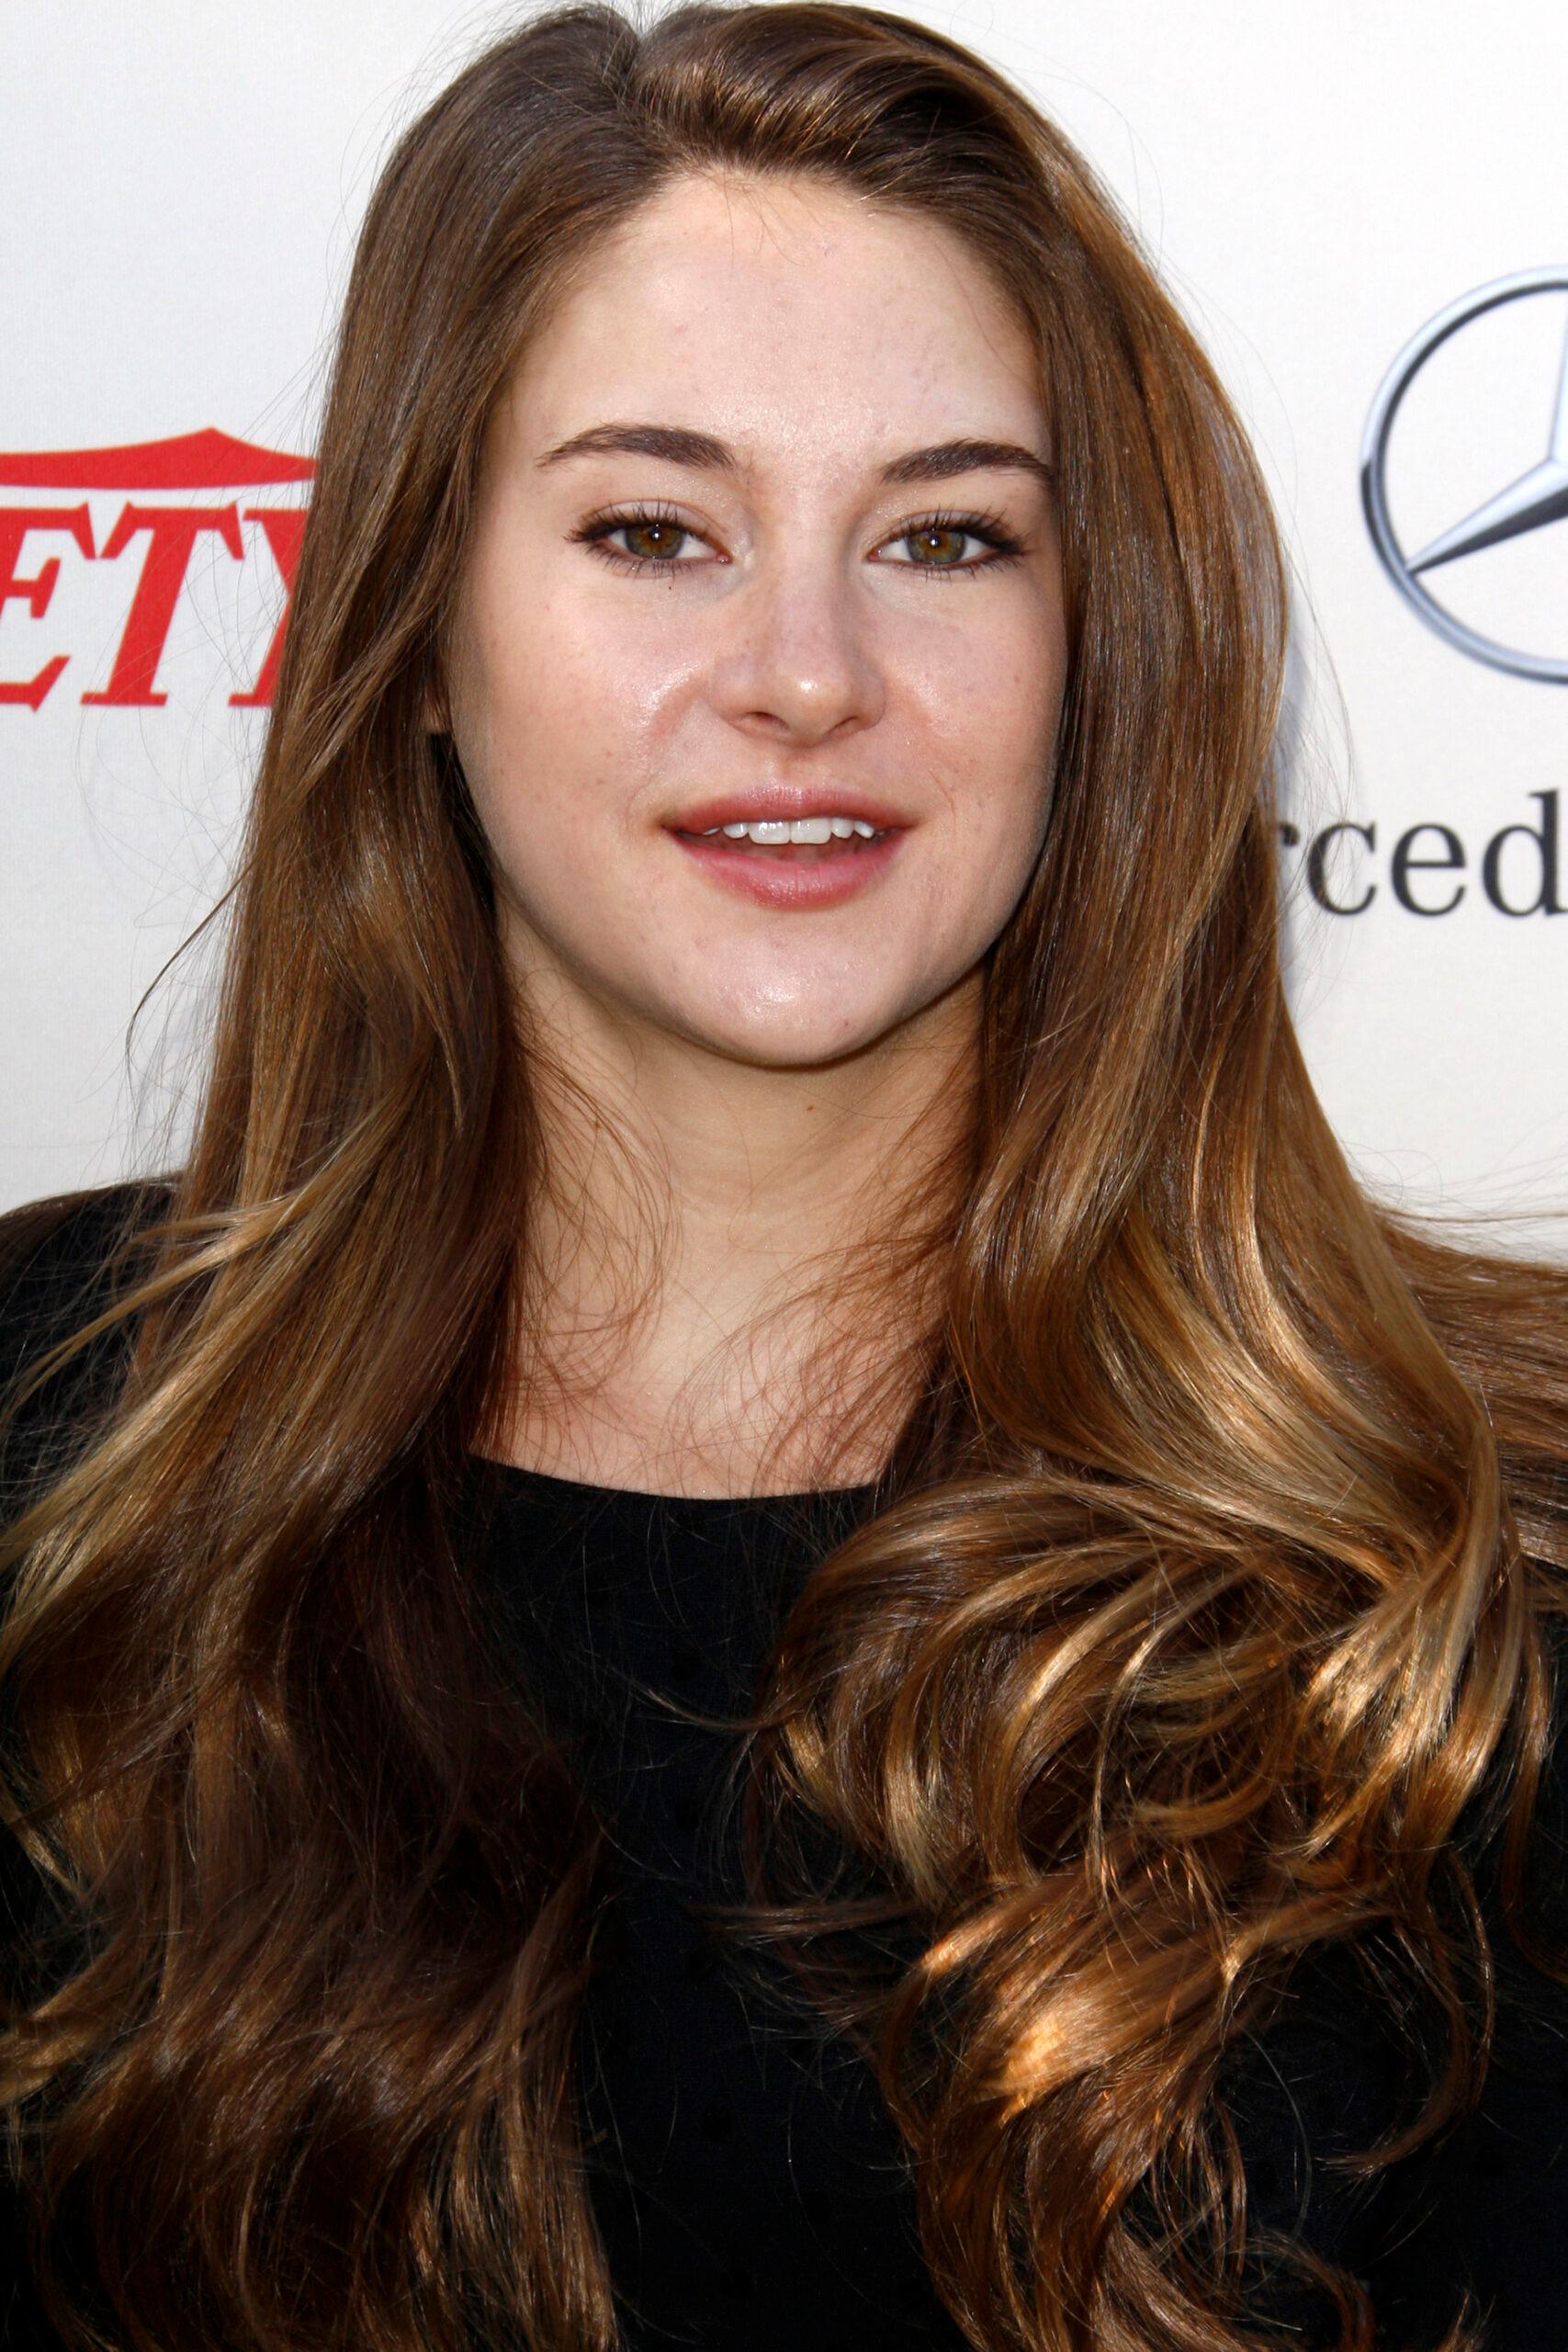 Shailene Woodley at the Variety's 10 Directors To Watch - Palm Springs